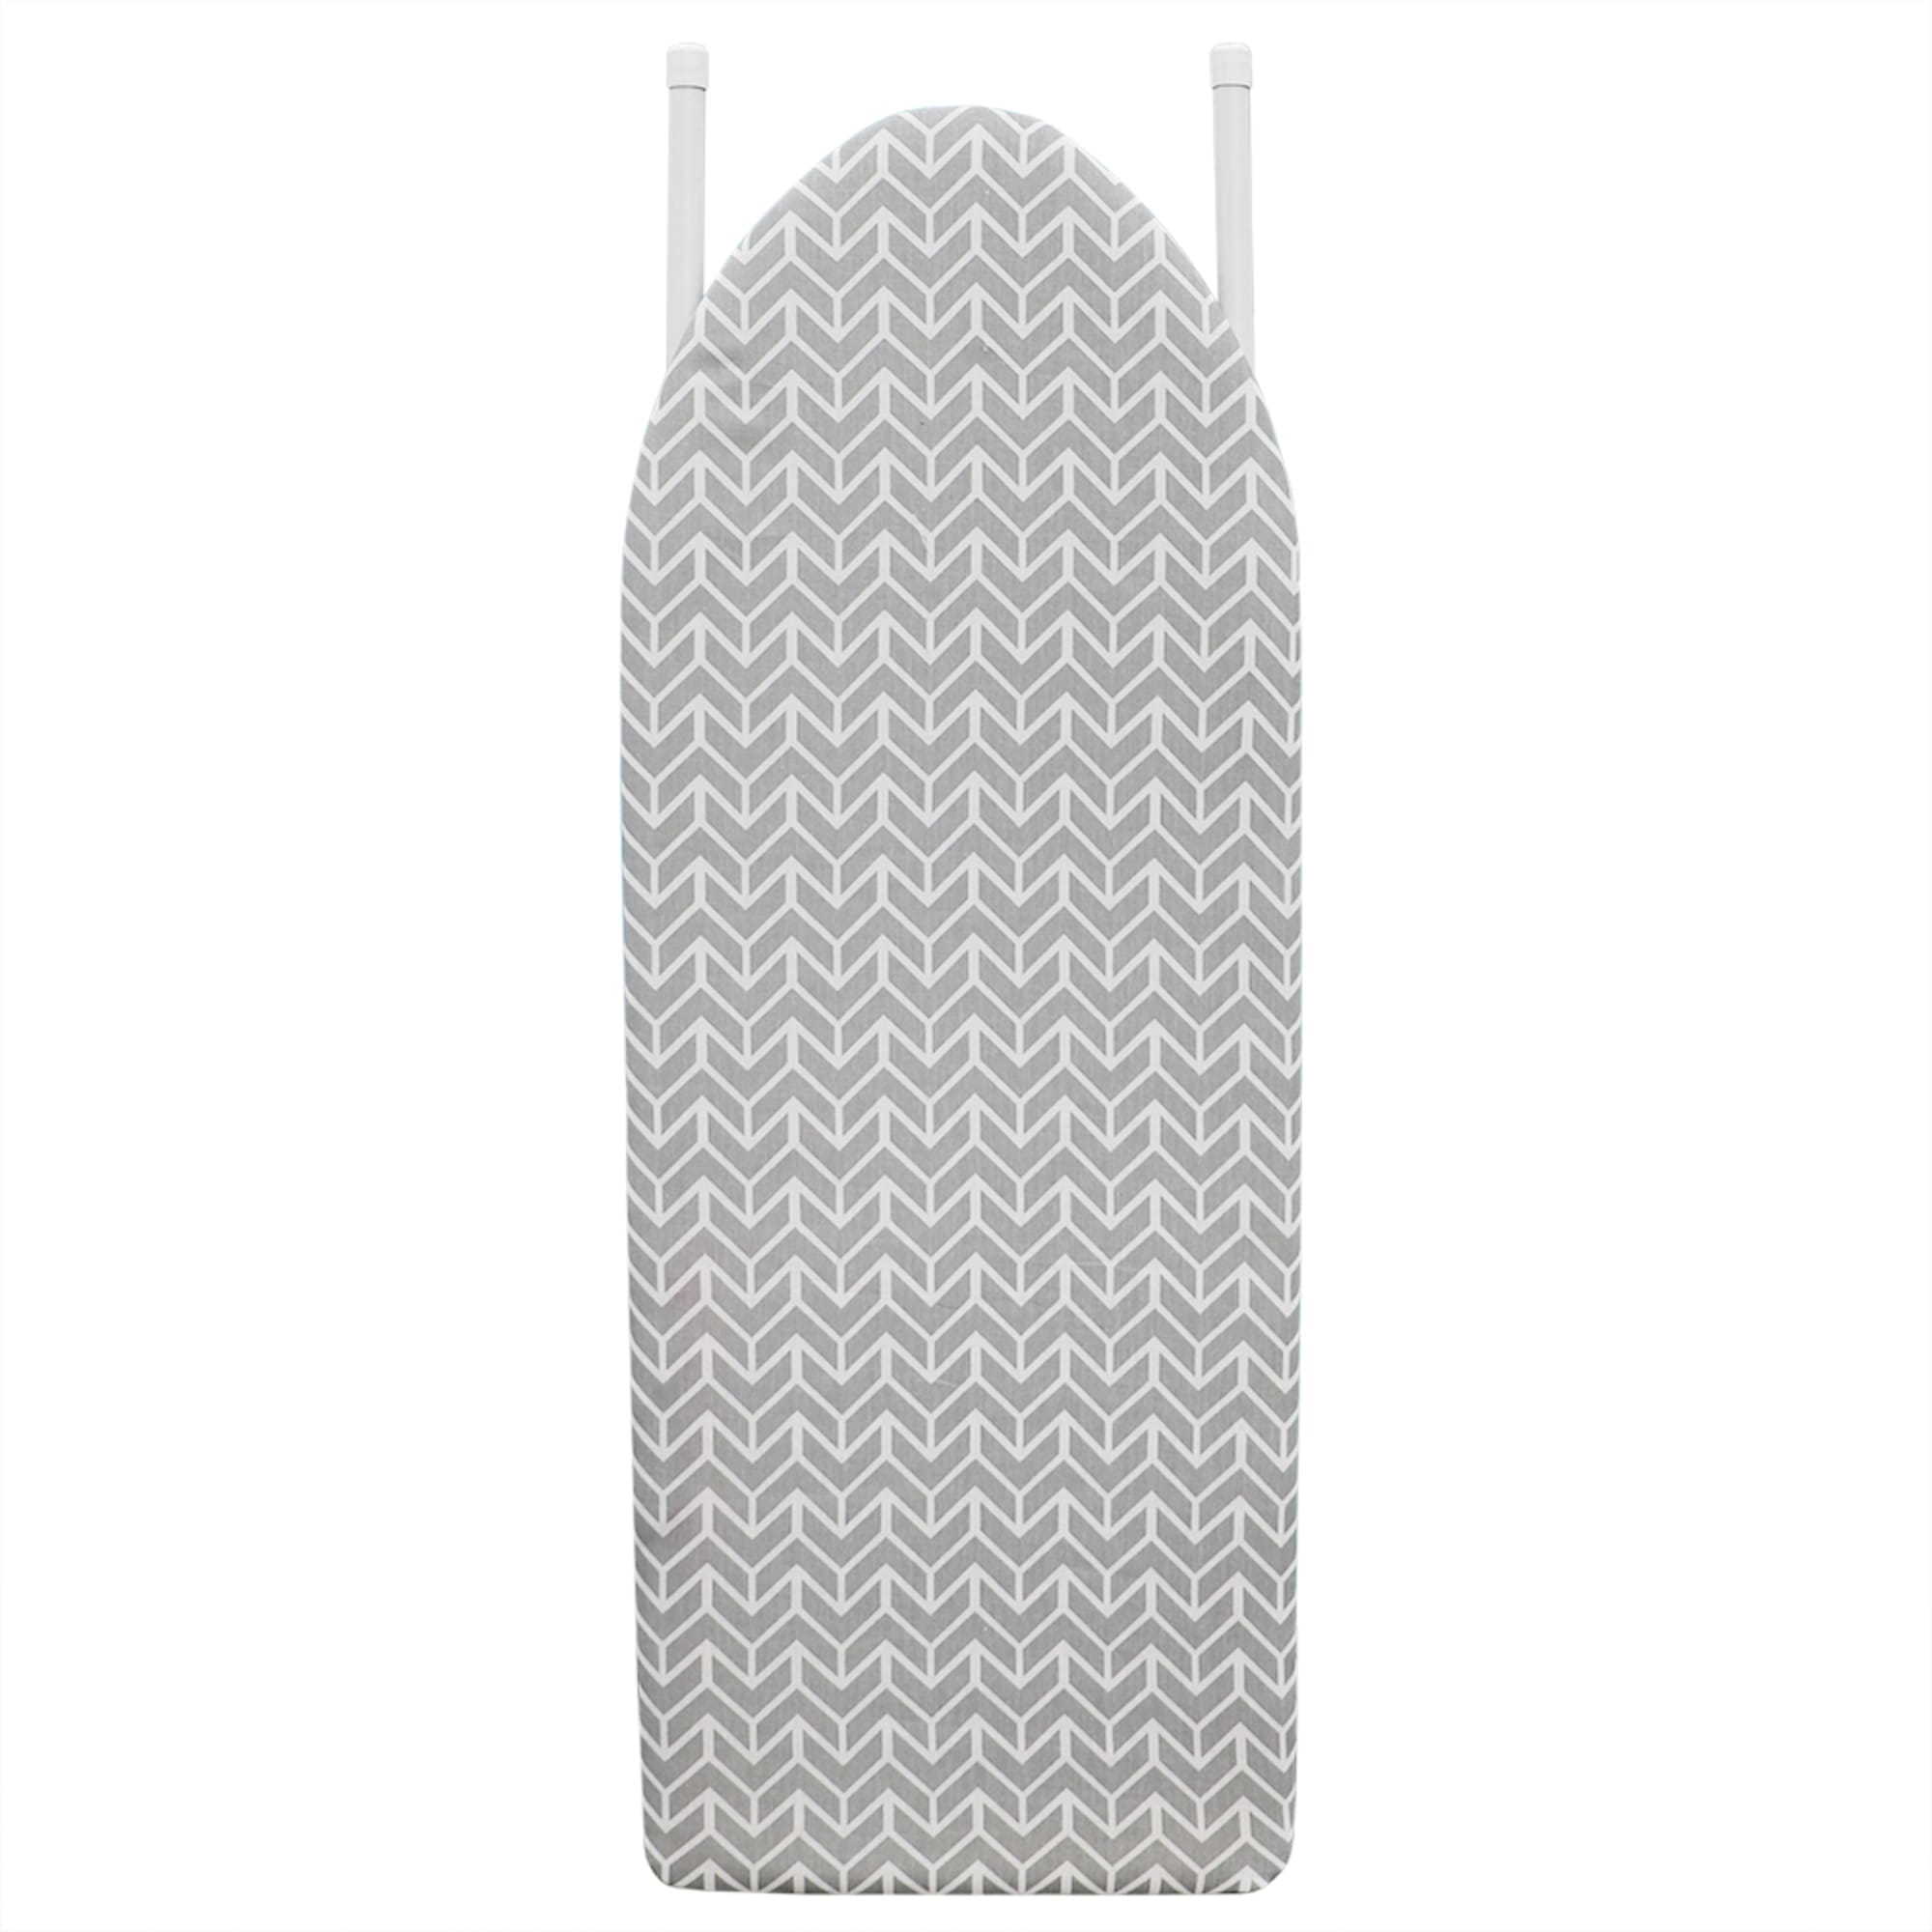 Home Basics Tabletop Ironing Board with Rest and Cover $12.00 EACH, CASE PACK OF 6